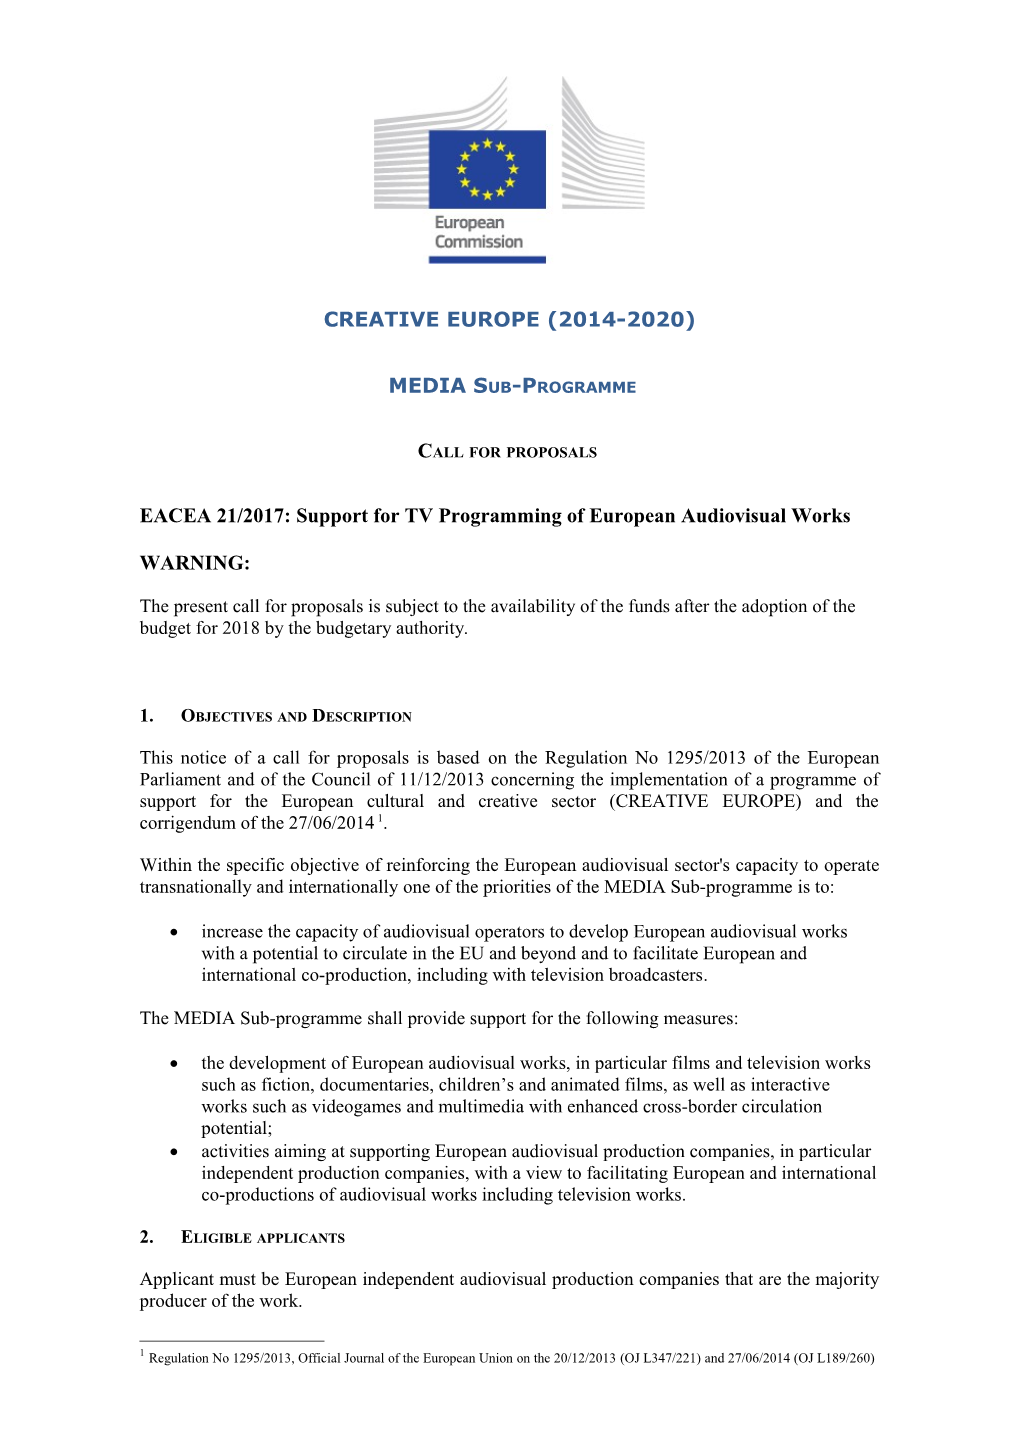 Call for Proposals Dg Eac N 87/2004